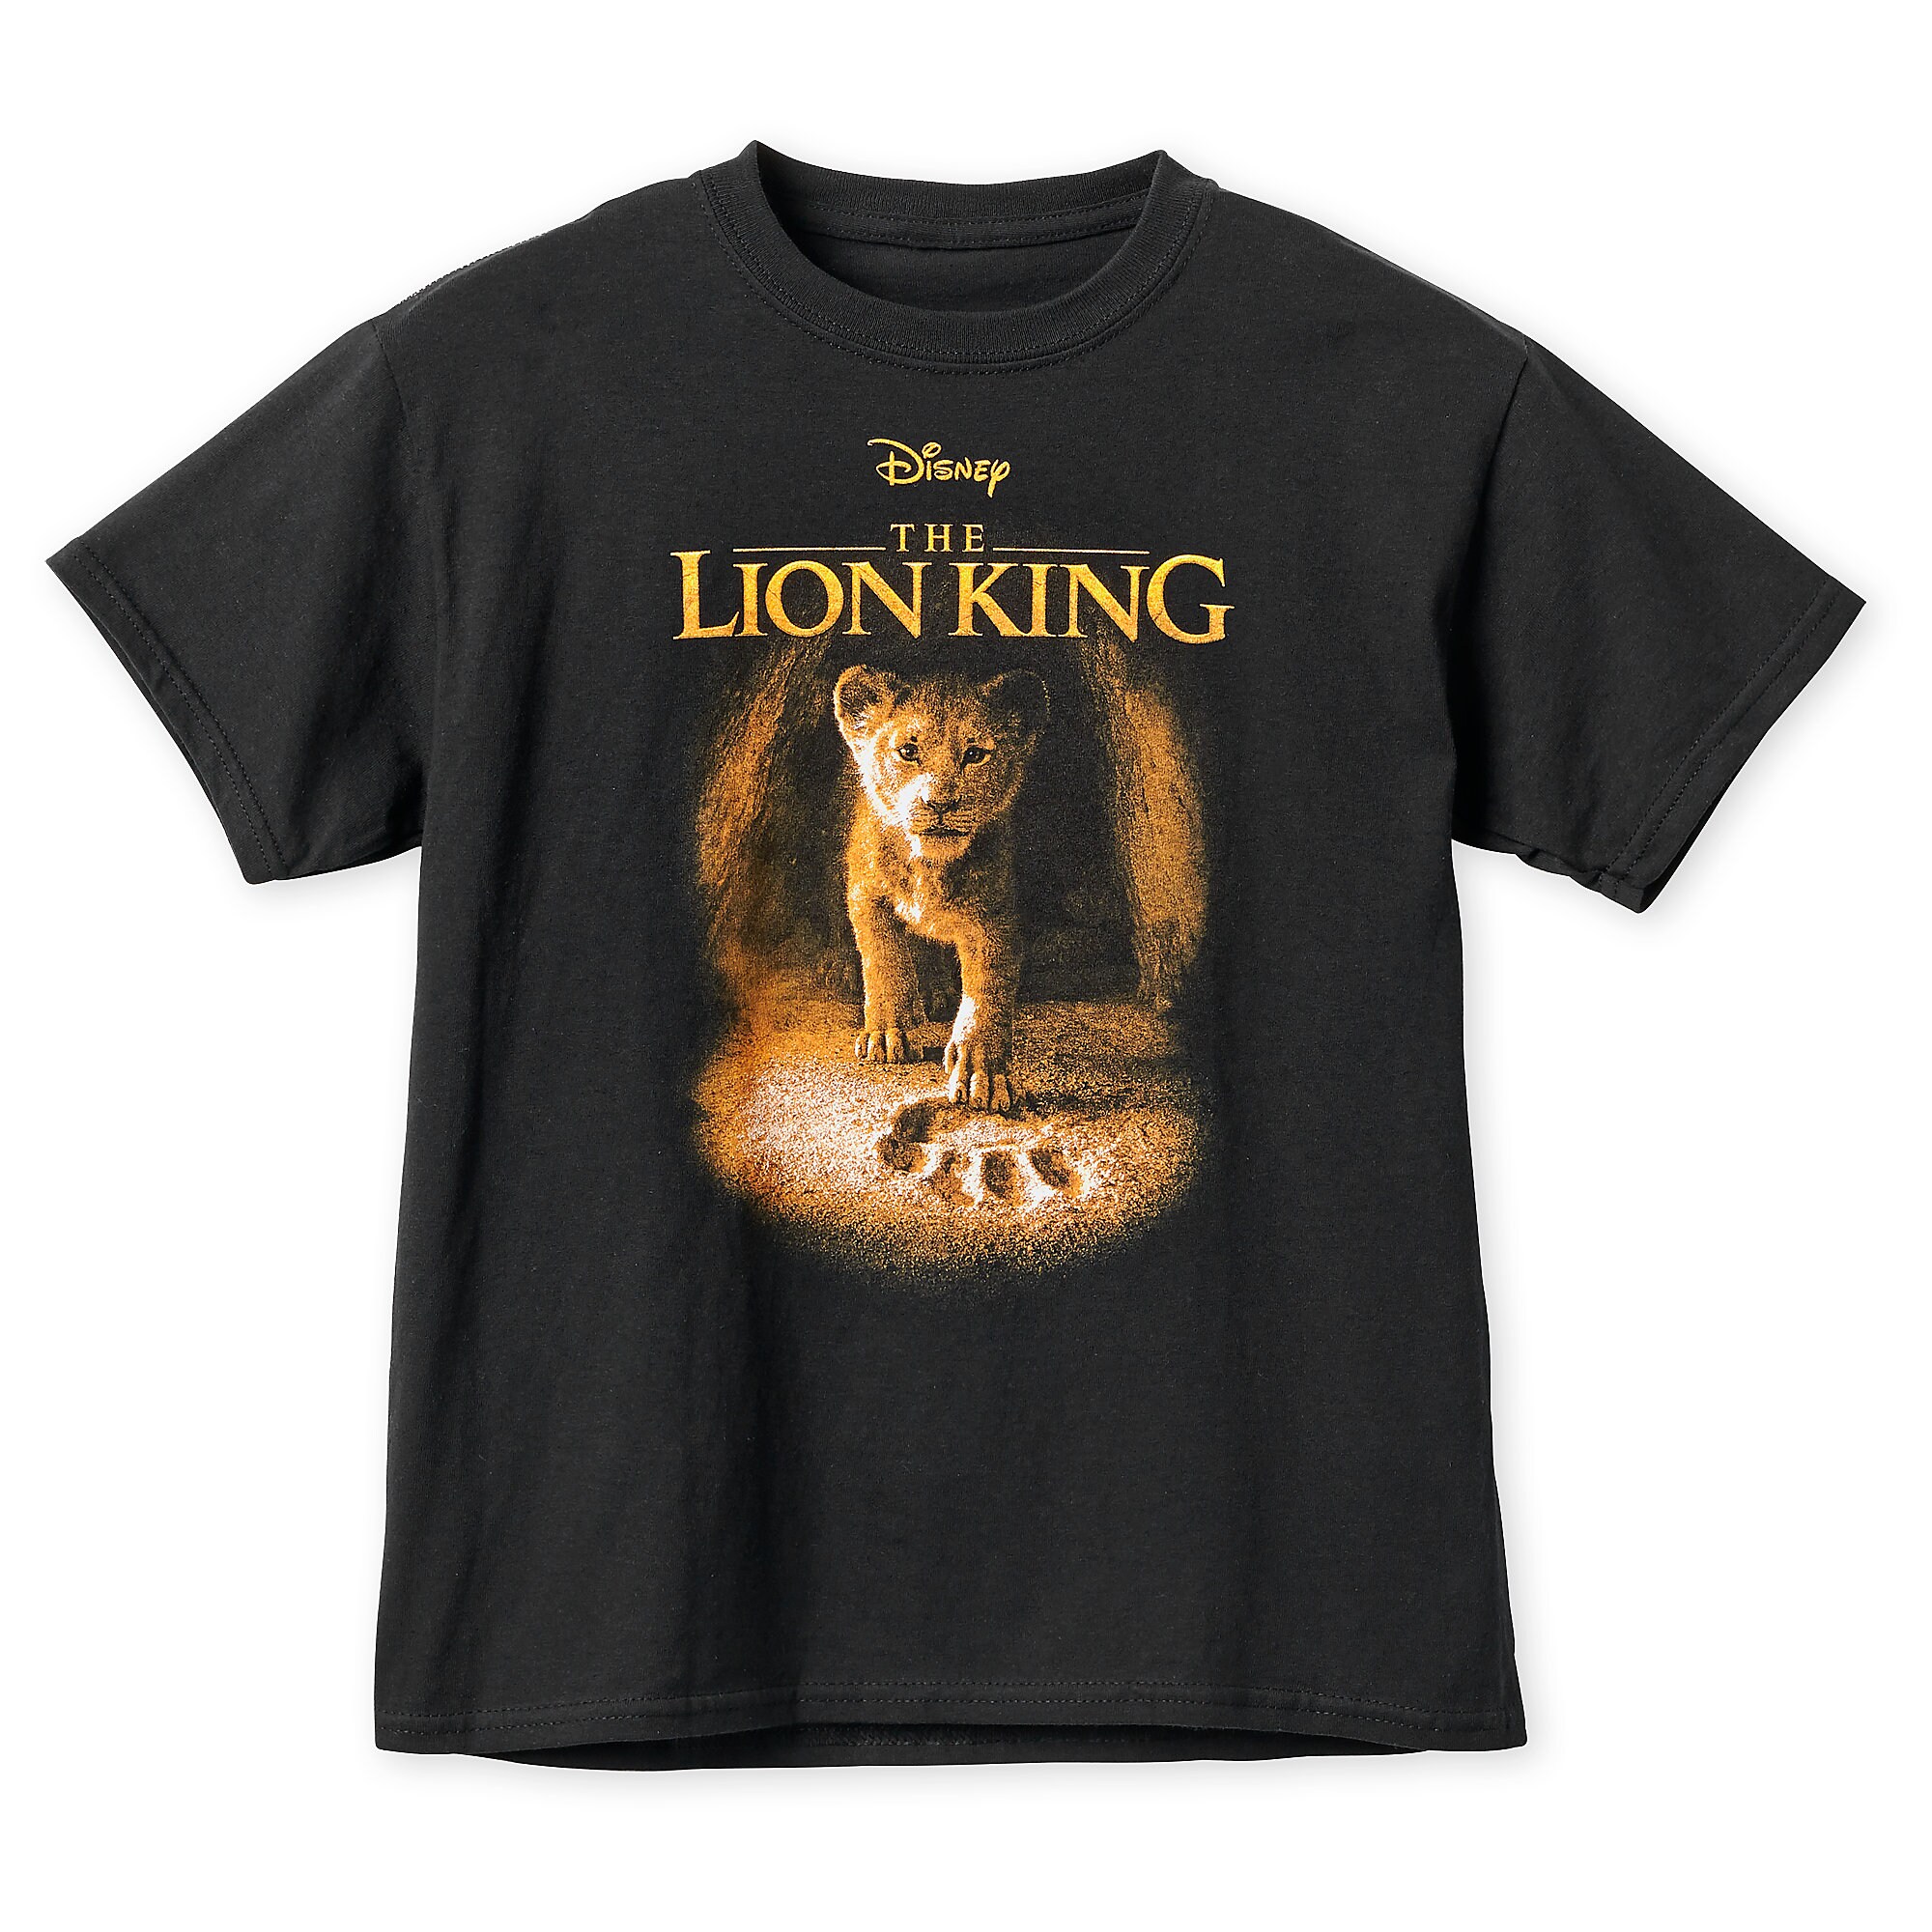 The Lion King 2019 T-Shirt for Boys